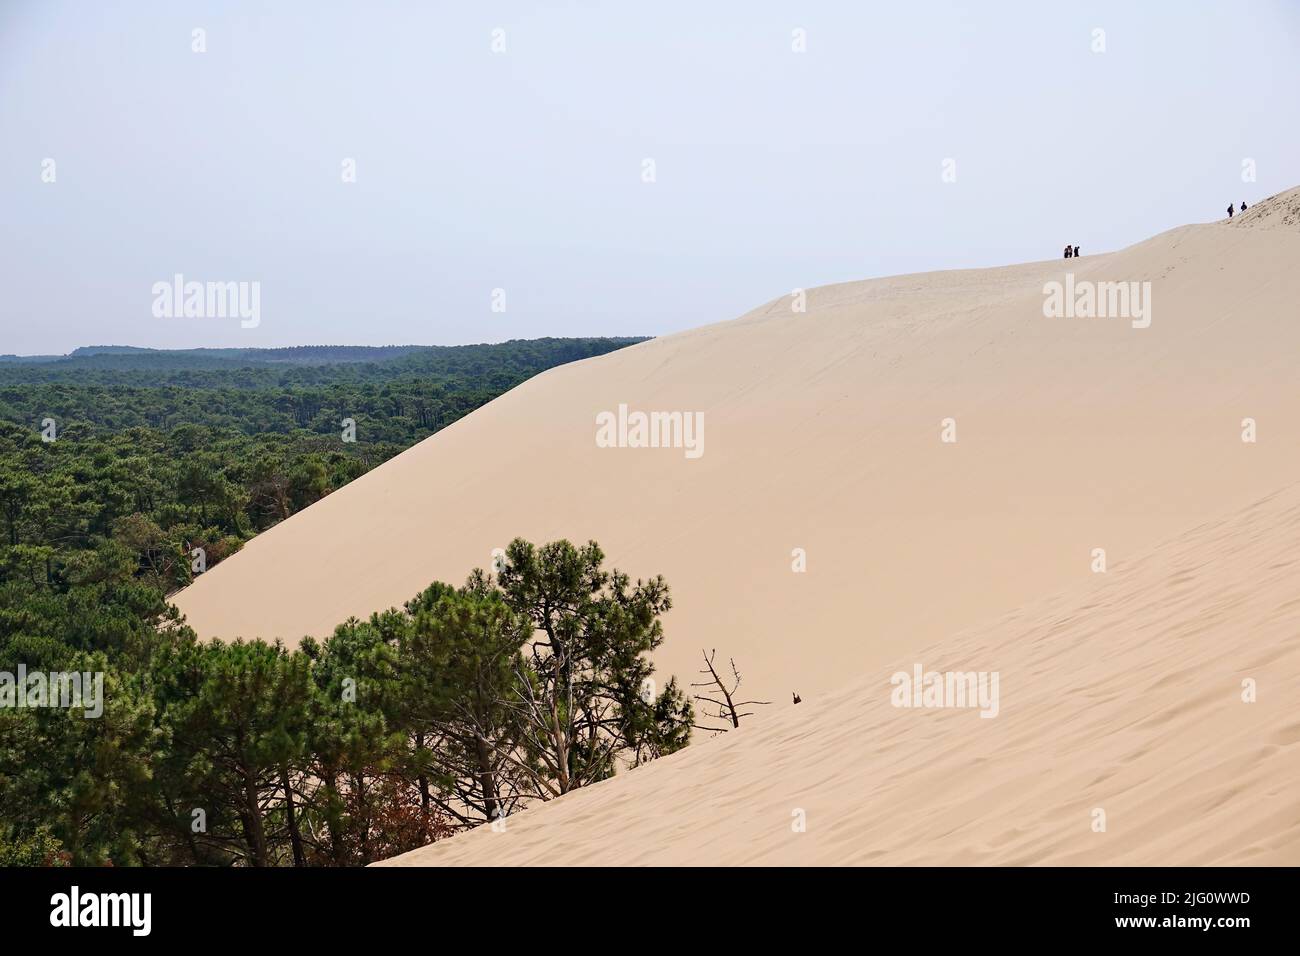 Dune du Pyla - the largest sand dune in Europe, Aquitaine, France - August 2018 Stock Photo